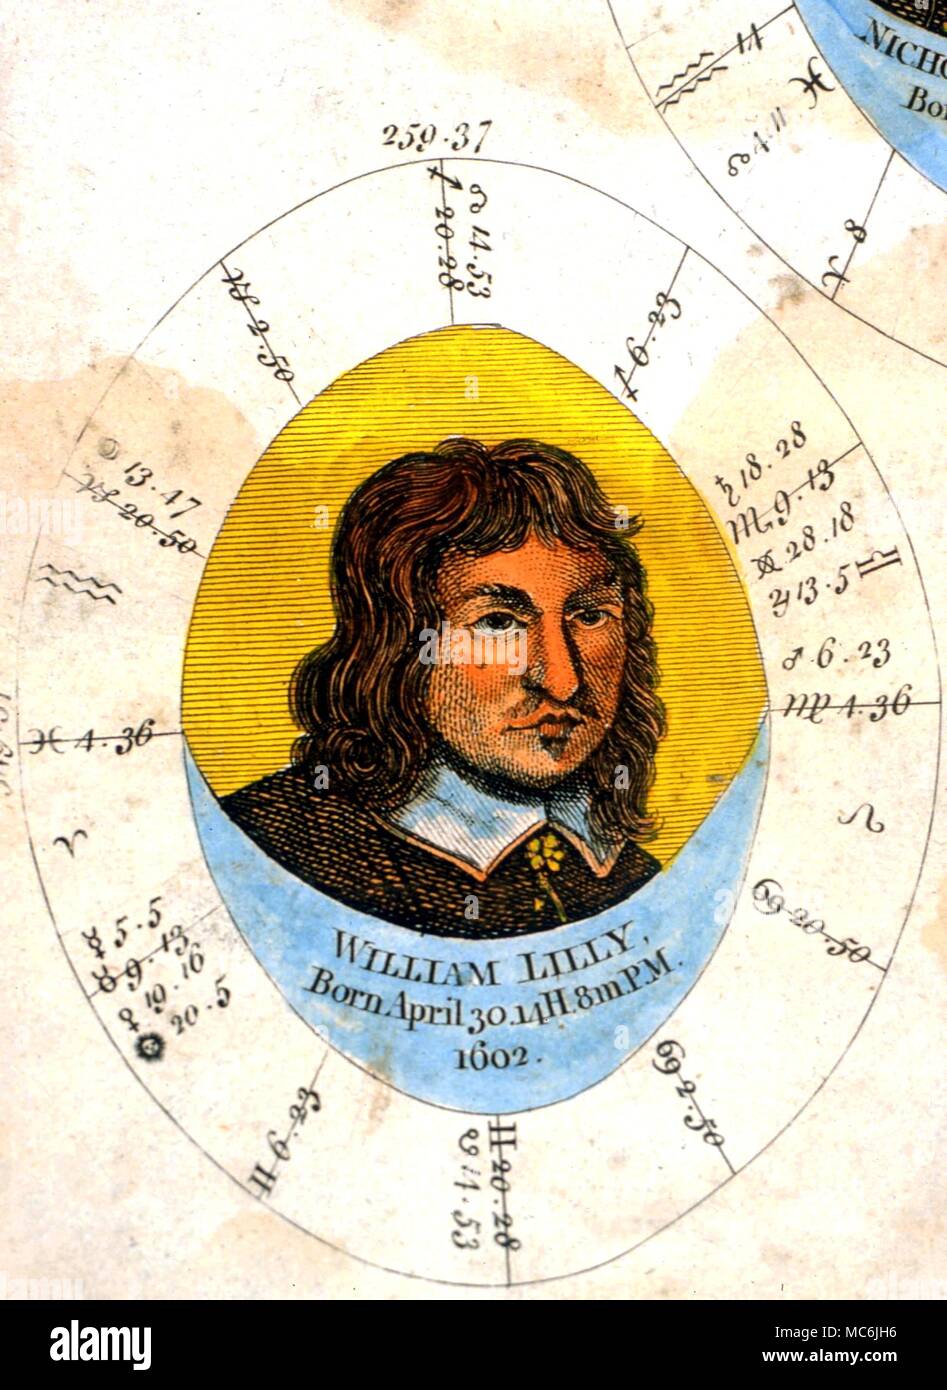 OCCULTISTS - WILLIAM LILLY. Horosope of the English astrologer, William Lilly, cast for 30 April, 1602. From the 1790 engraving in Sibly's 'Illustration of the Occult Arts'. Stock Photo